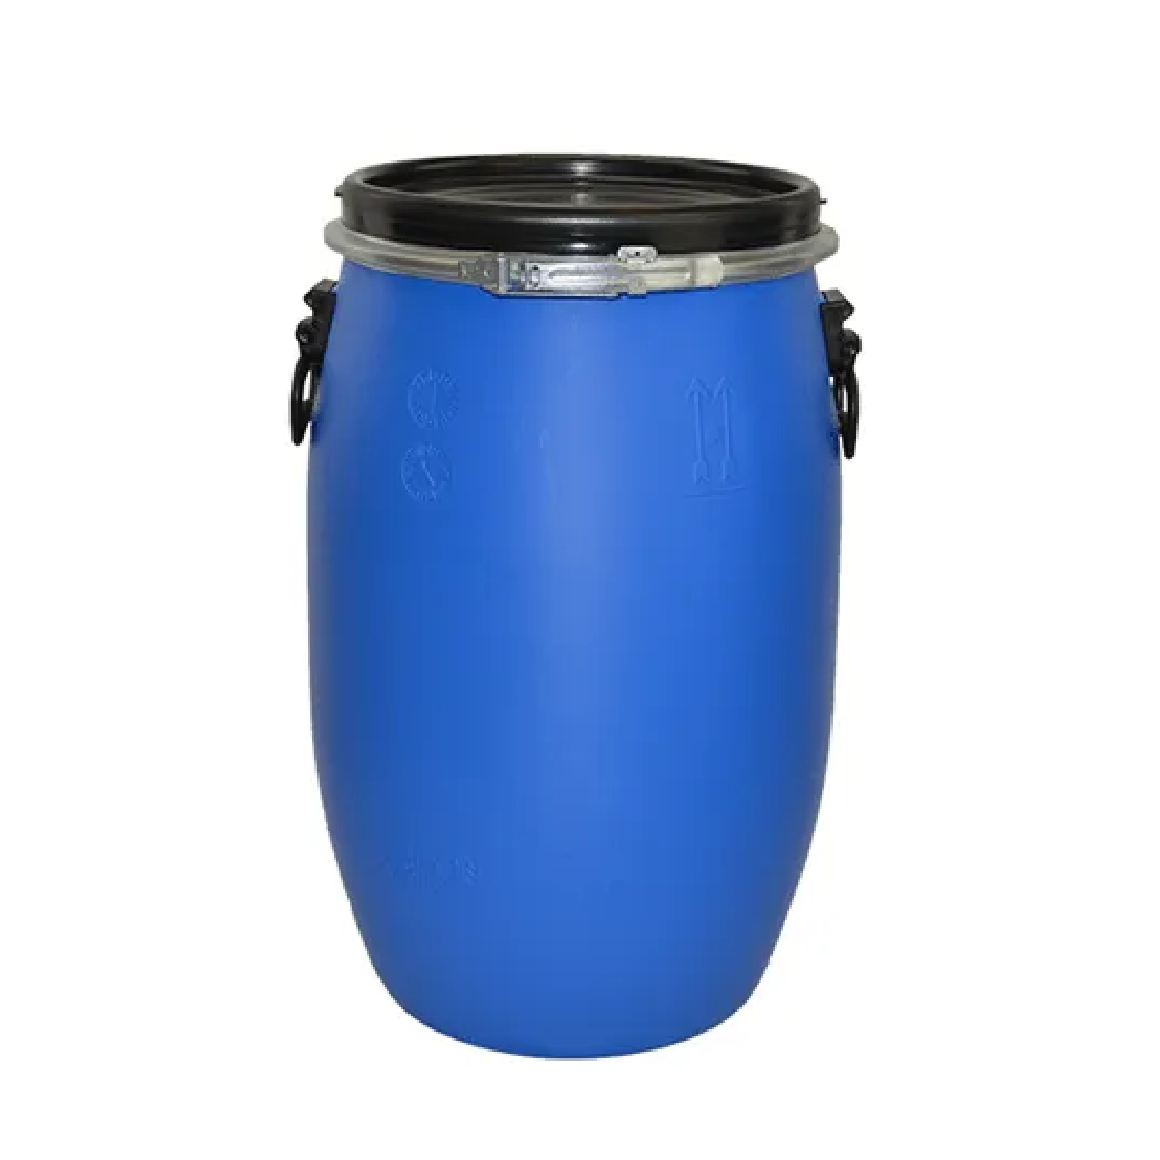 HardwareCity Open Top Drum With Cover 60L BLUE HDPE PLASTIC